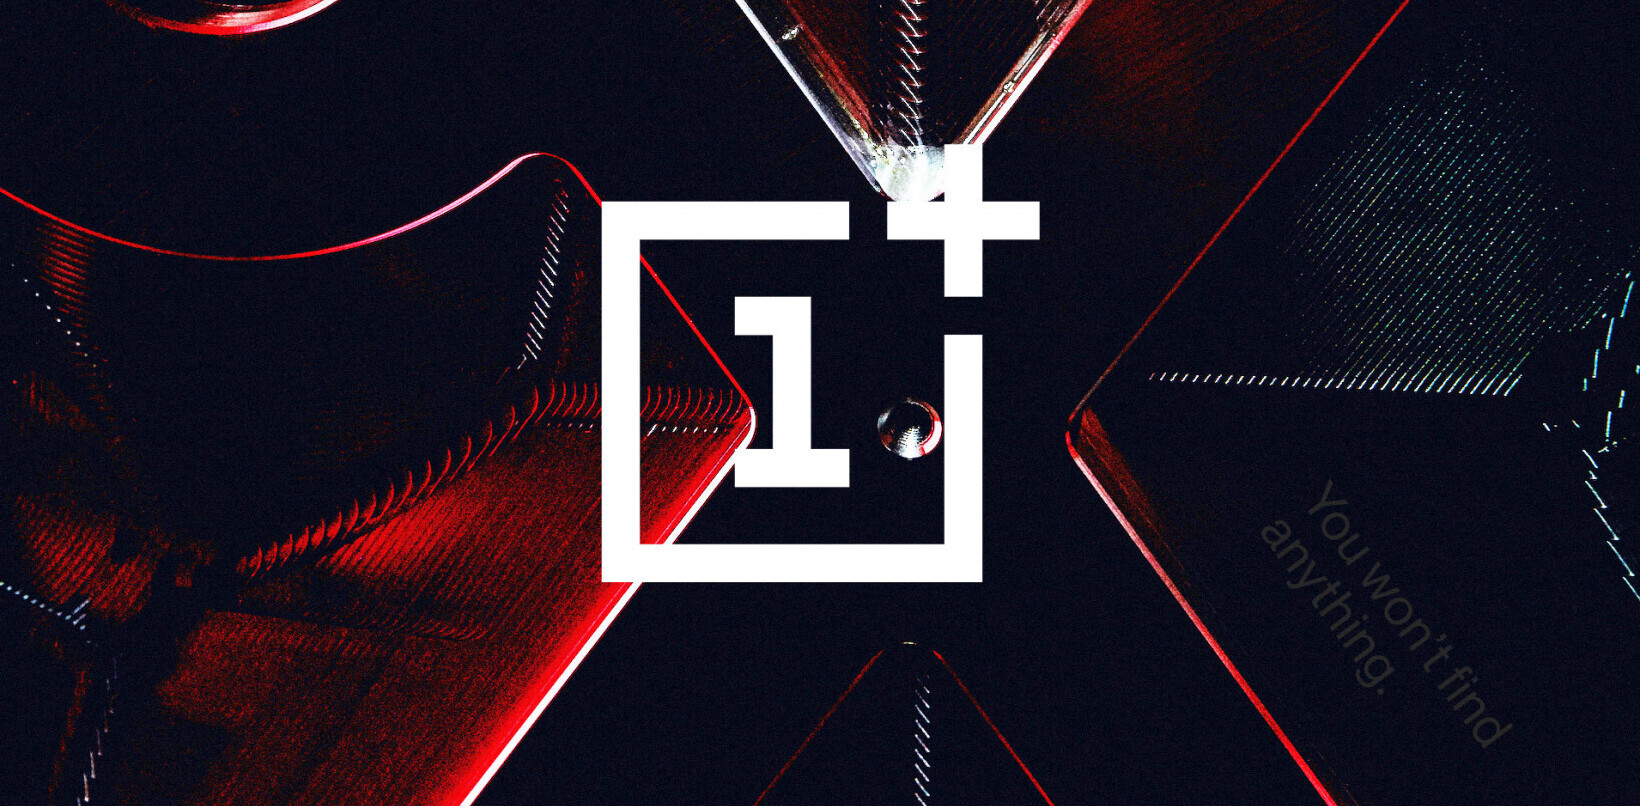 OnePlus teases a surprise announcement on March 3, and it’s not a phone